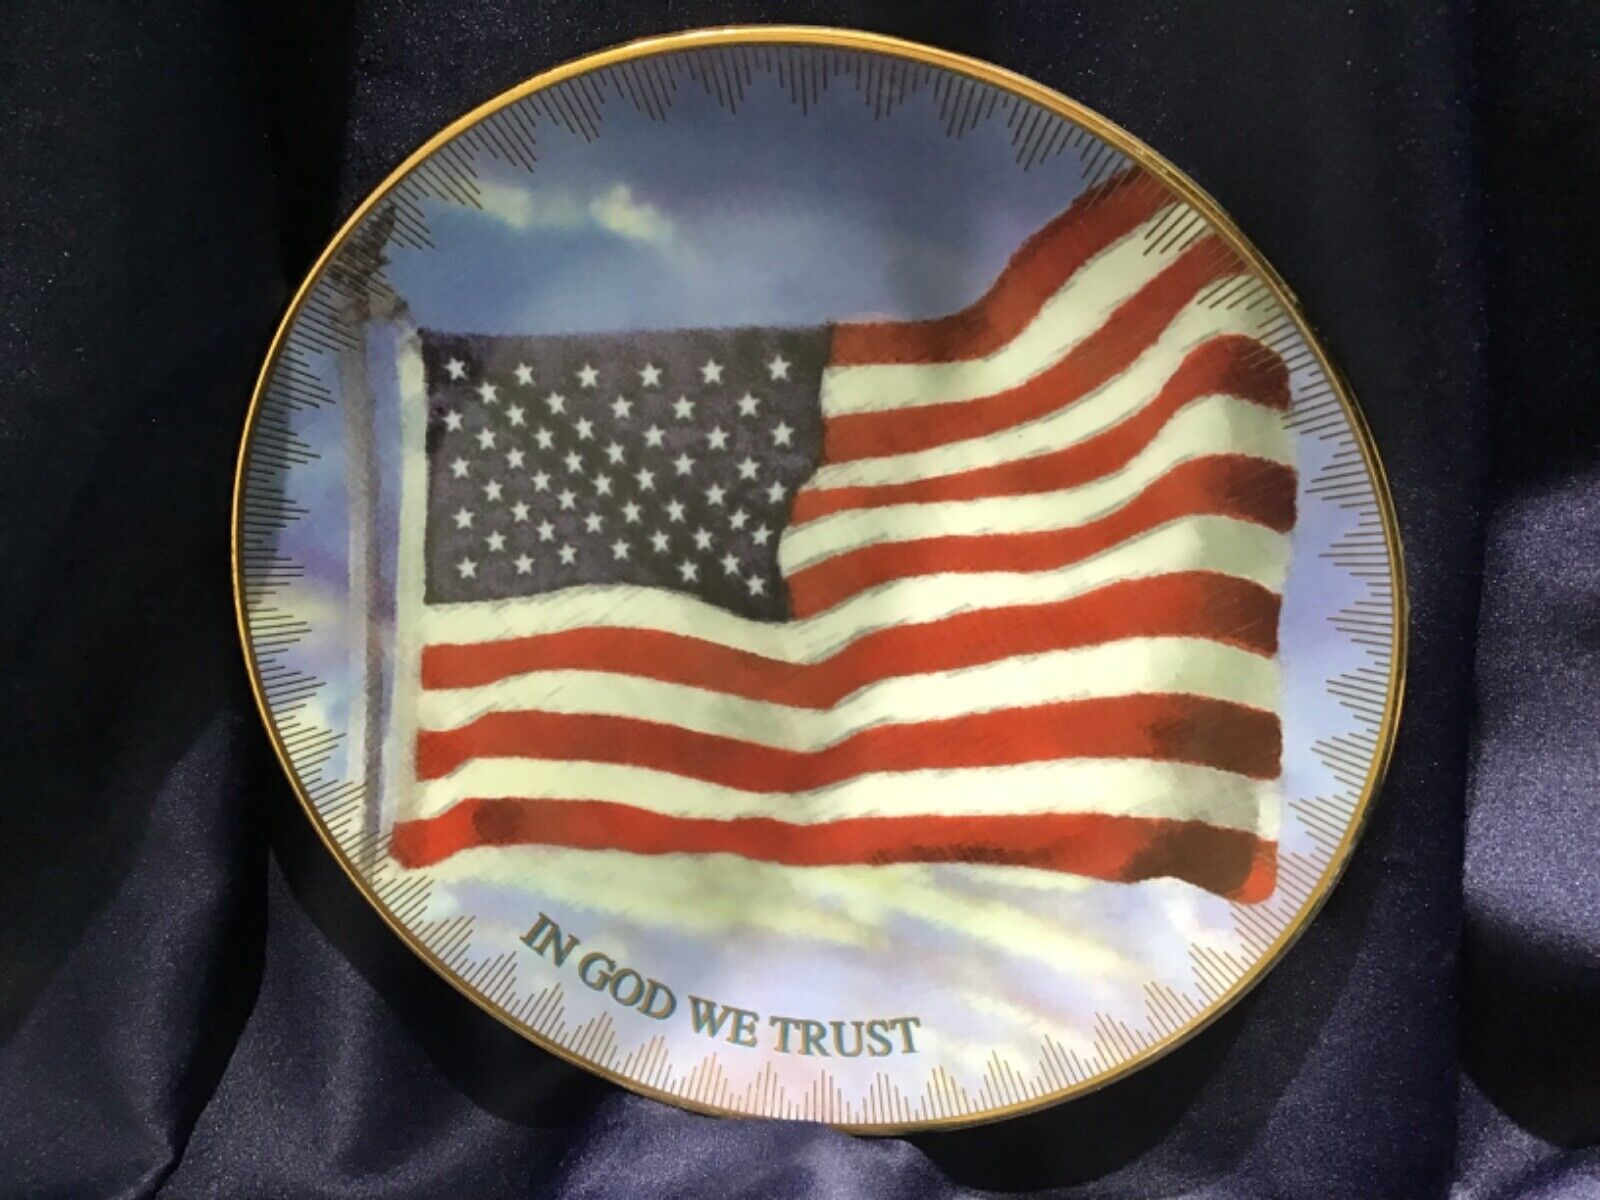 OLD GLORY 9-11 Ltd edition PLATE IN GOD WE TRUST GOD BLESS AMERICA collector